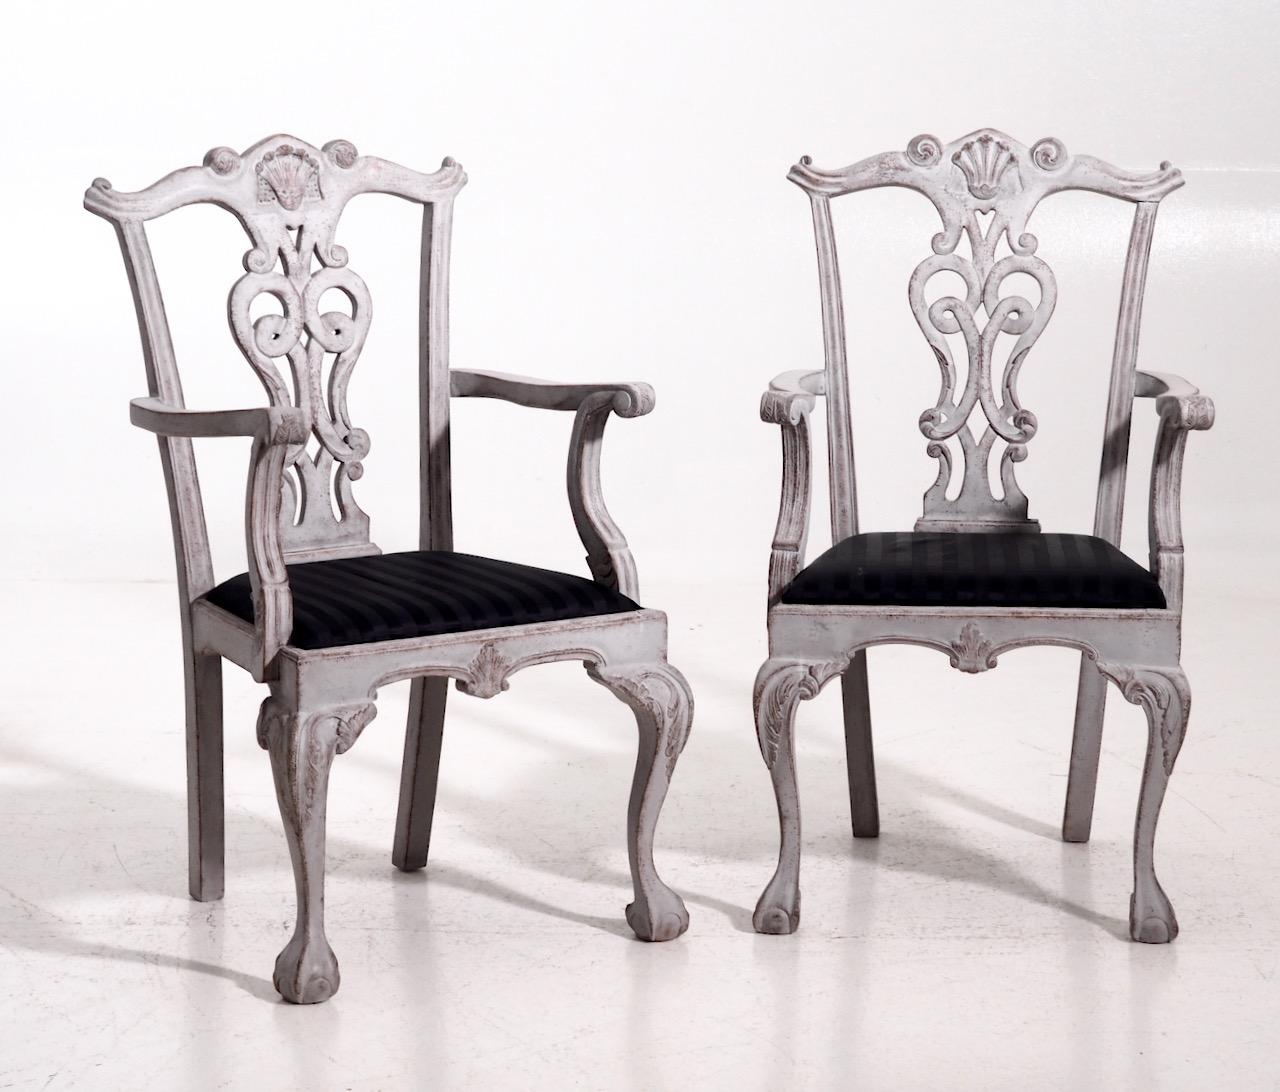 Fine set of eight large chairs (including two armchairs), richly carved, early 20th century.